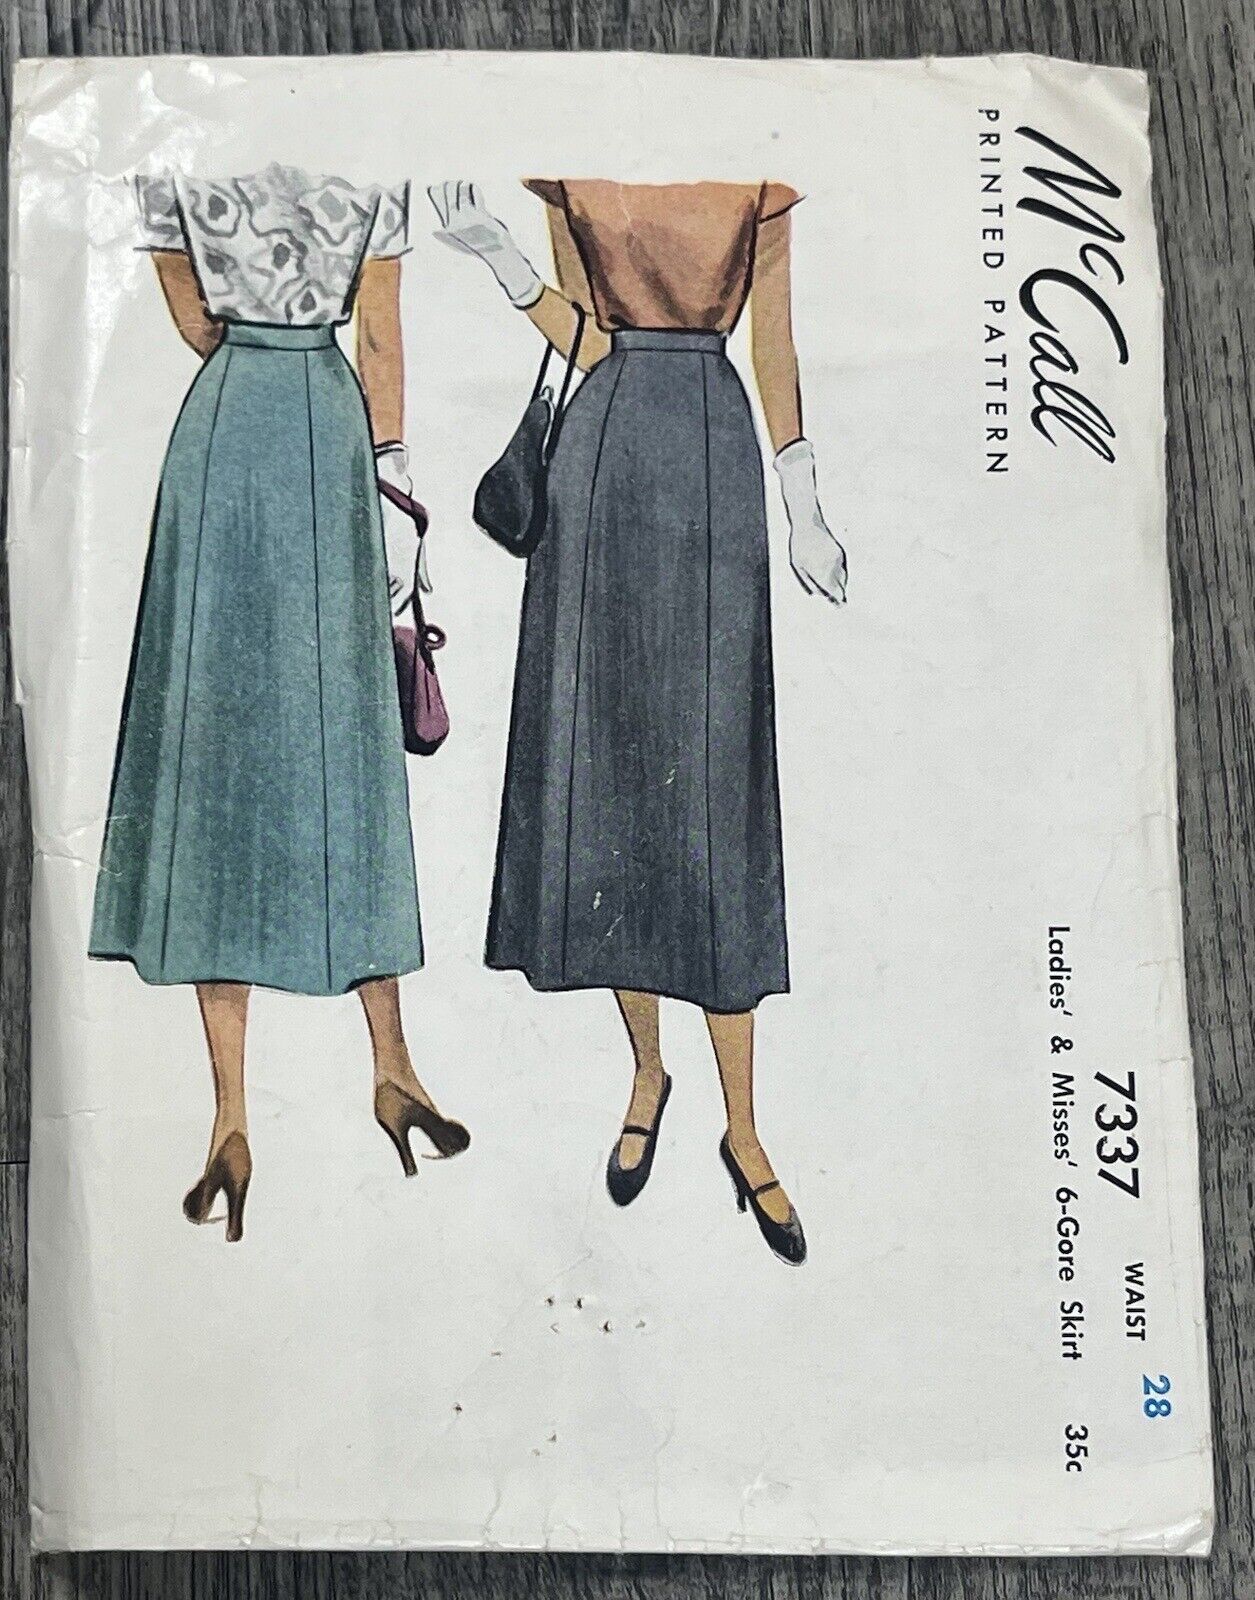 VTG 1948 McCall’s Sewing 6-Gare Skirt Pattern 7337 Misses Size 28